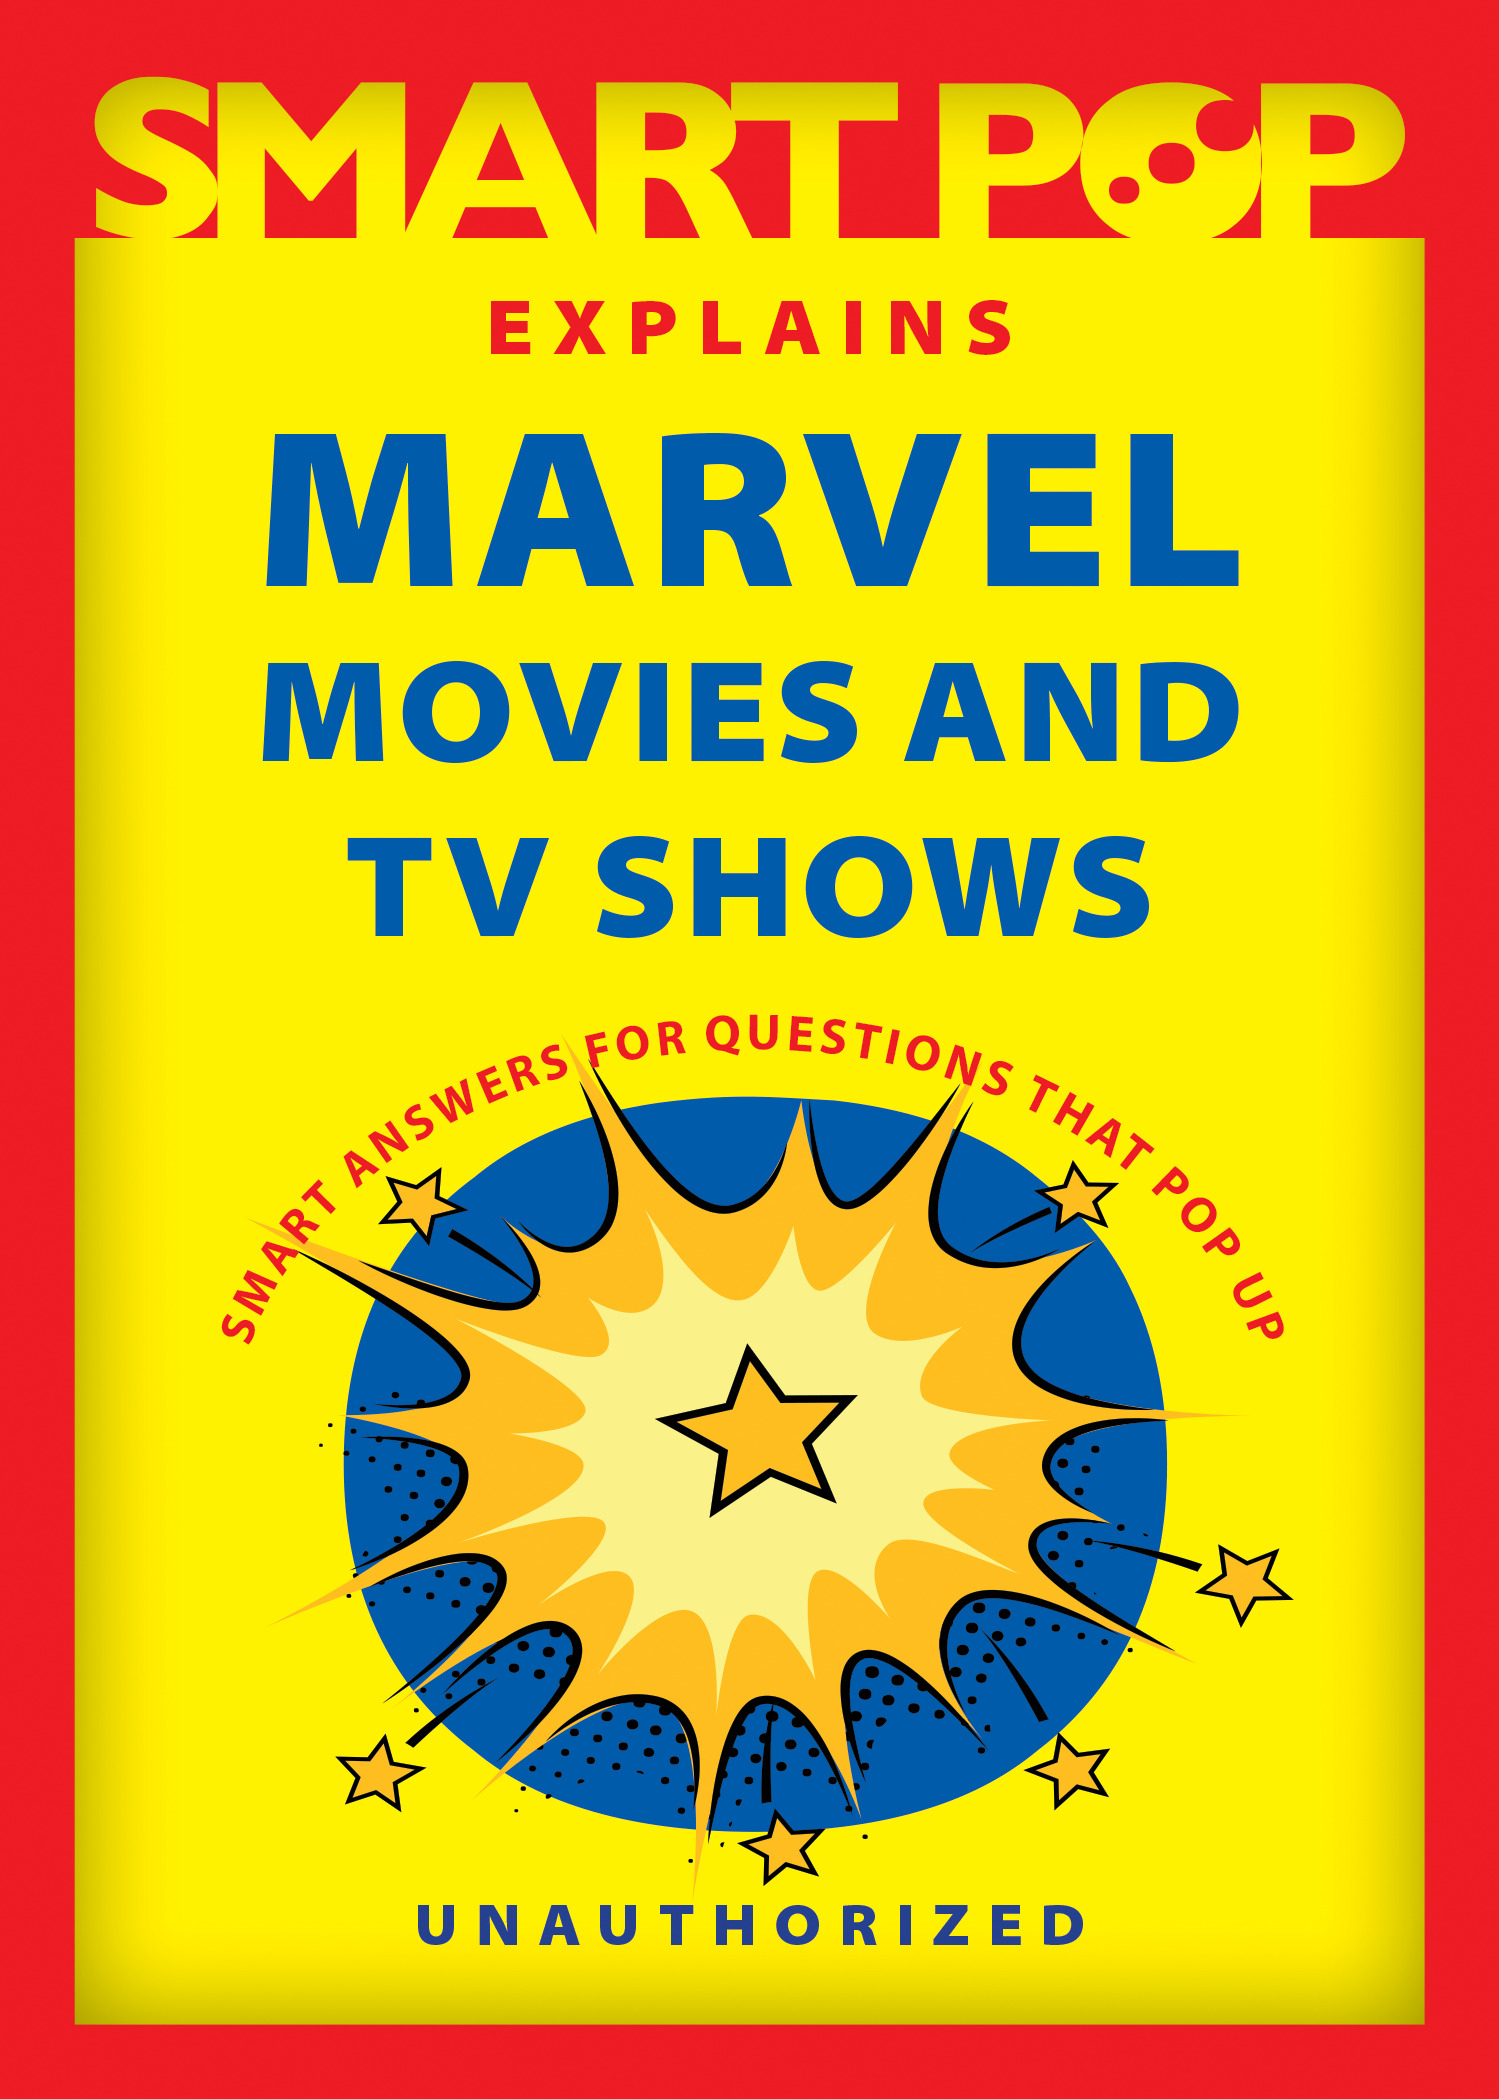 Smart Pop Explains Marvel Movies and TV Shows | The Editors of Smart Pop